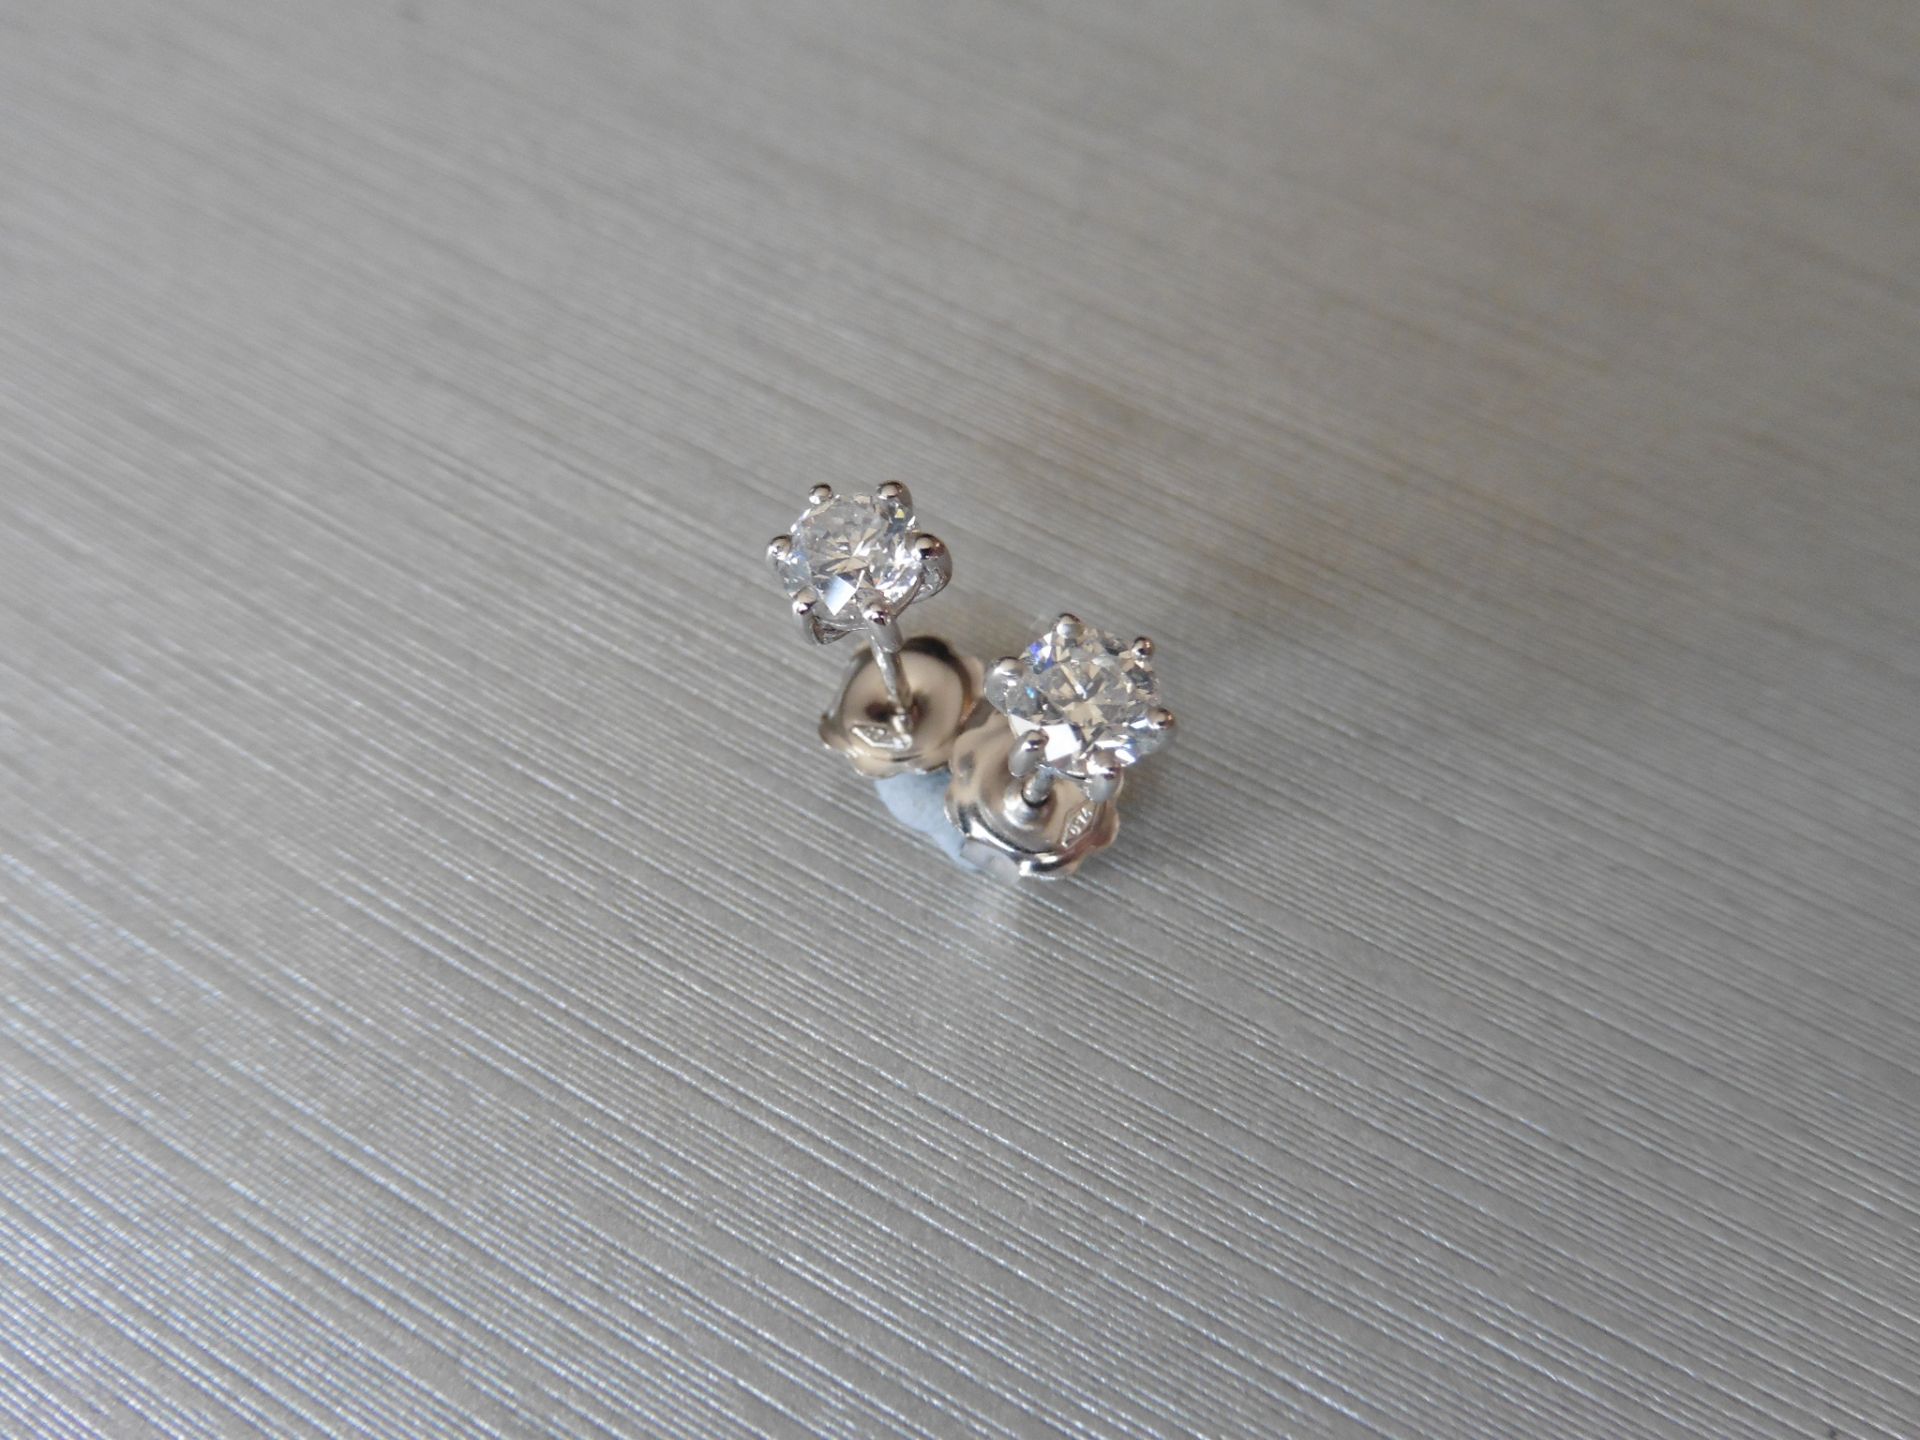 0.75ct Solitaire diamond stud earrings set with brilliant cut diamonds, SI2 clarity and I colour.